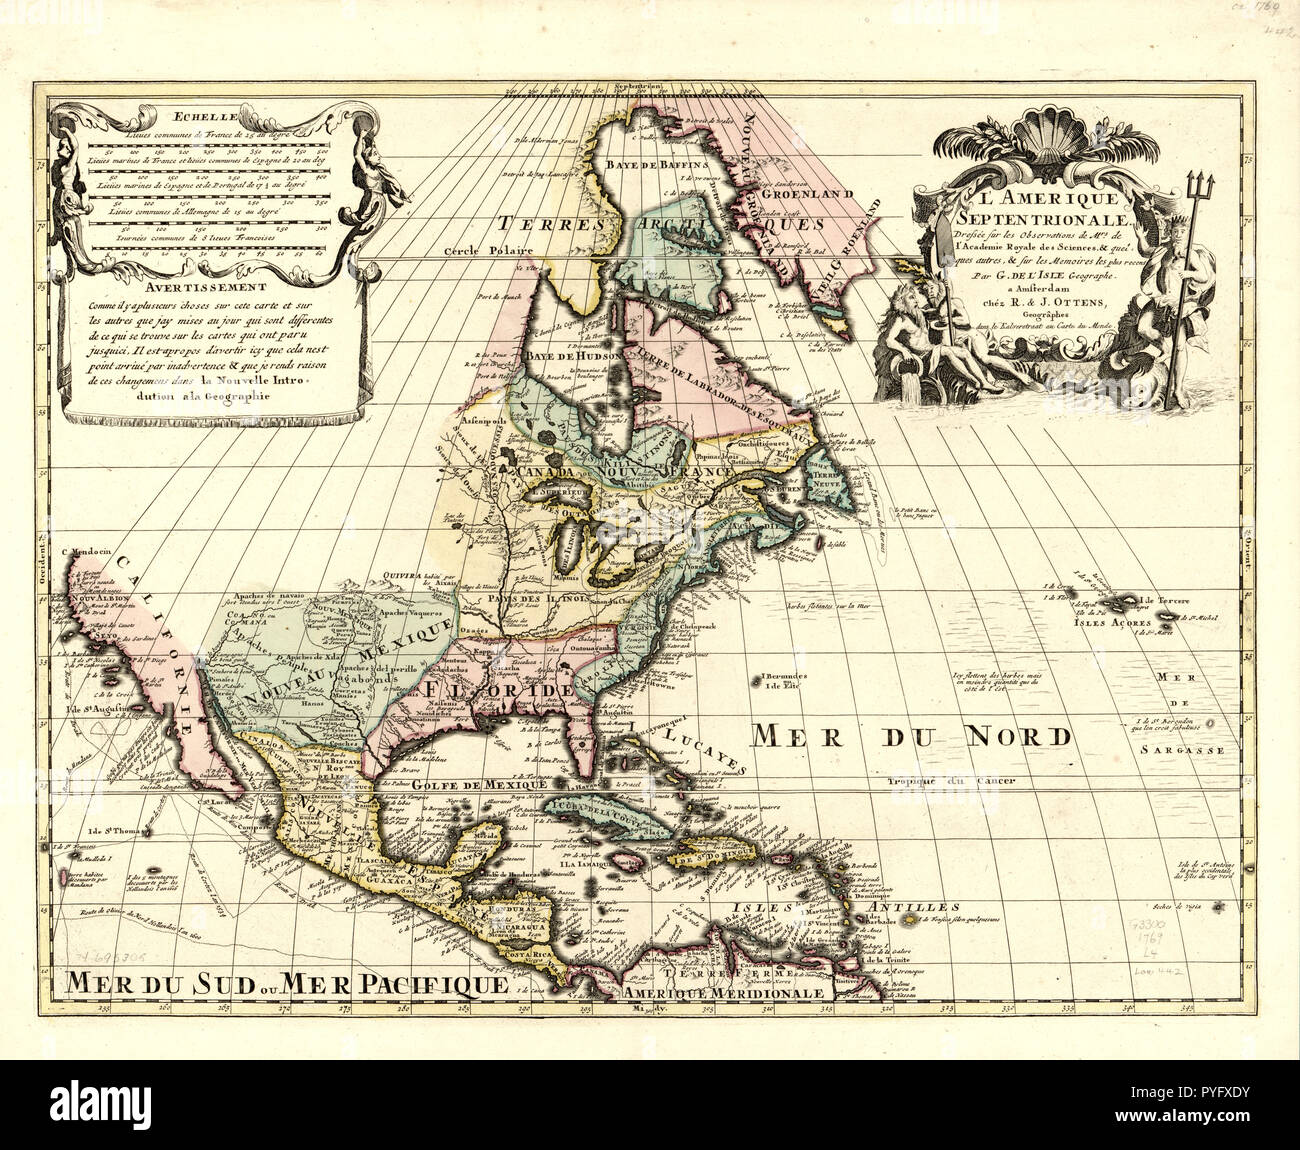 Vintage Maps / Antique Maps -  North America map ca. 1760 Stock Photo